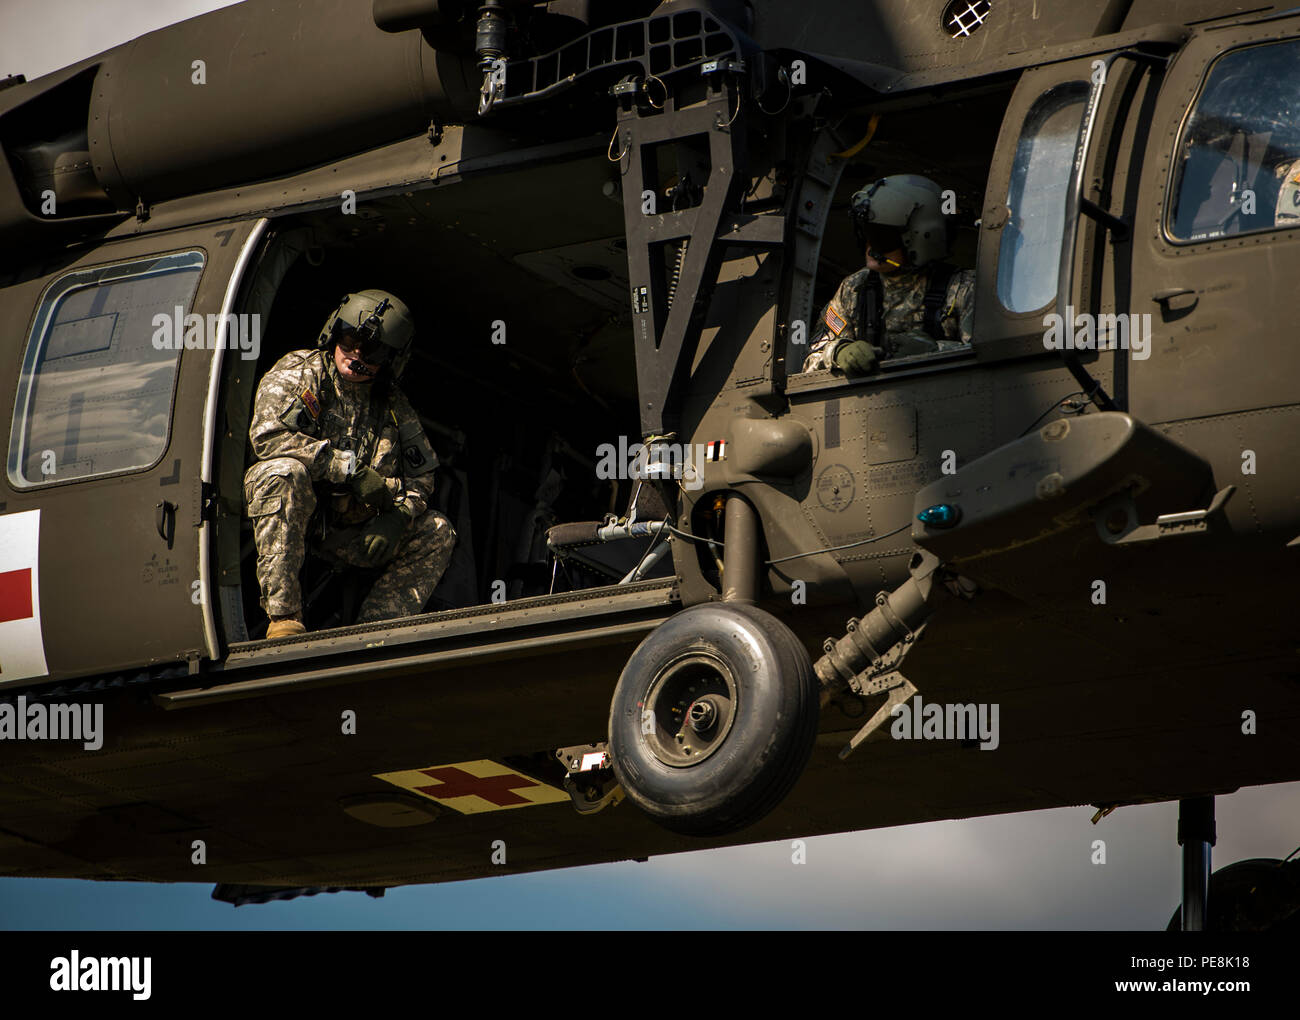 Soldiers with the Mississippi Army National Guard Medical Evacuation Team look out the window while on board a UH-60 Black Hawk helicopter at Camp Shelby Joint Forces Training Center, Miss., during Exercise Turbo Distribution, Oct. 29, 2015. The U.S. Transportation Command exercise tests the Joint Task Force Port-Opening's ability to deliver and distribute cargo during humanitarian relief operations. (U.S. Air Force photo by Staff Sgt. Marianique Santos/Released) Stock Photo